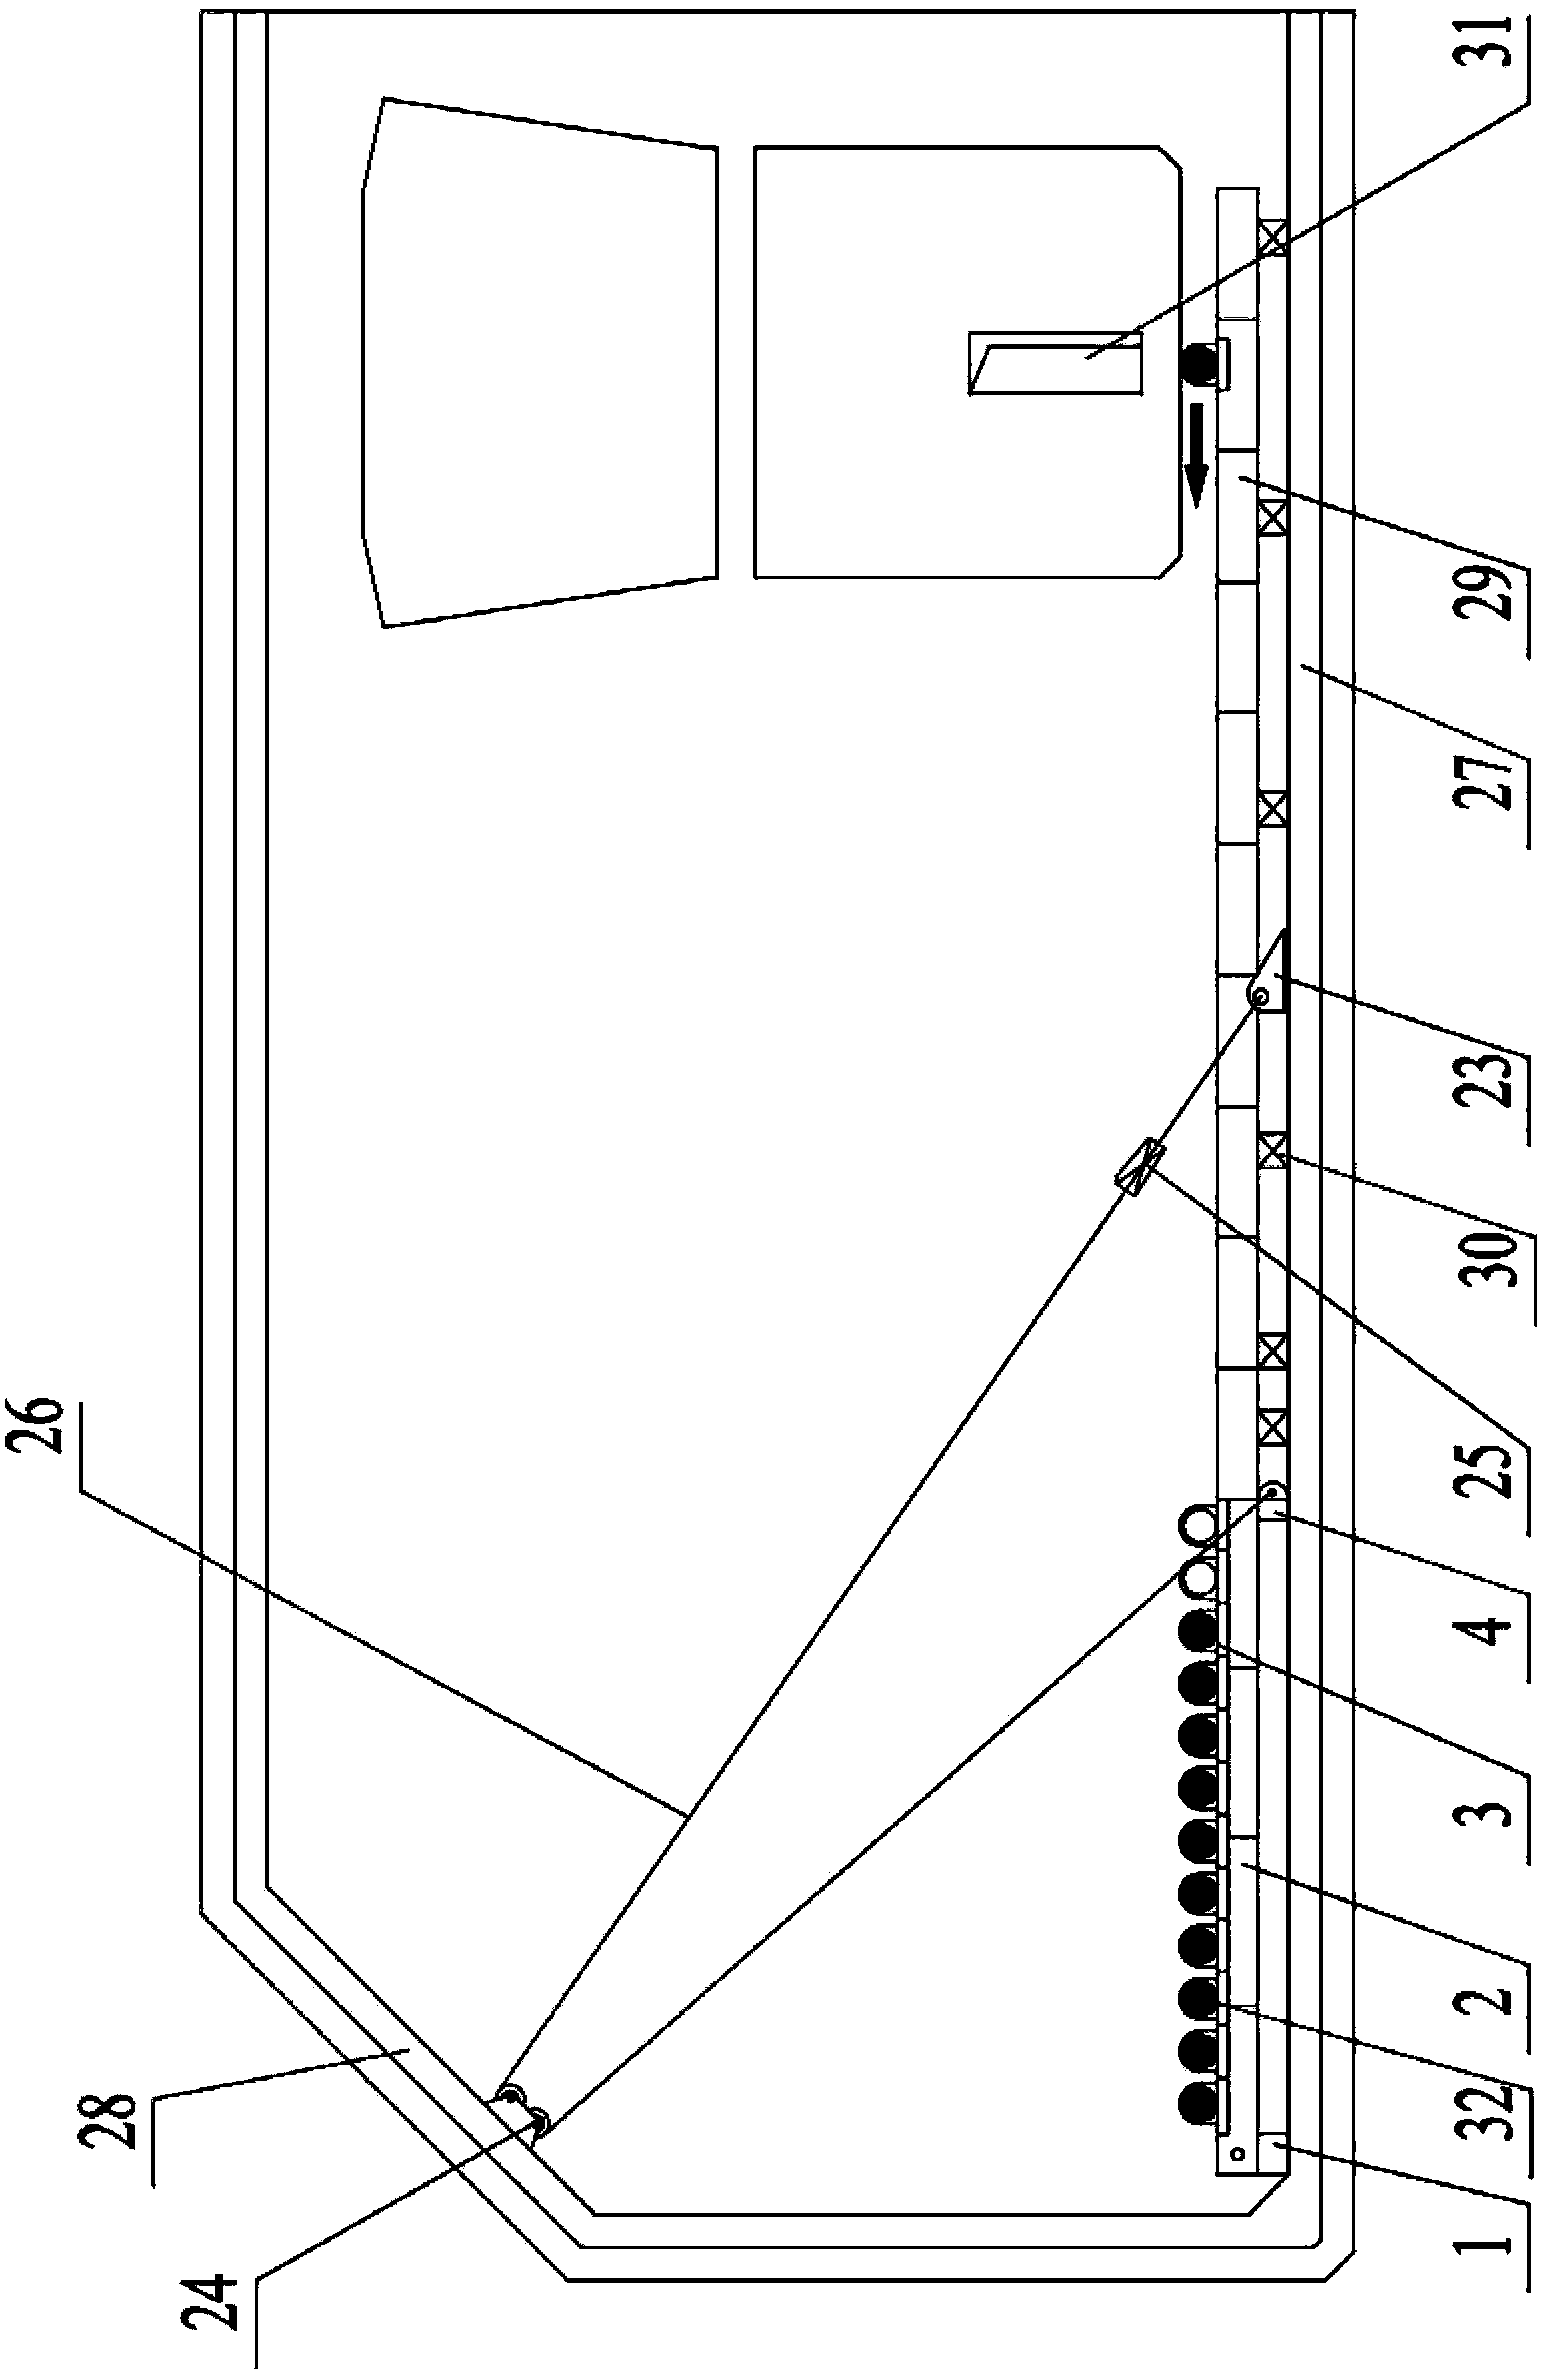 Intra-cavity mounting rack of inside deviation rectifying device